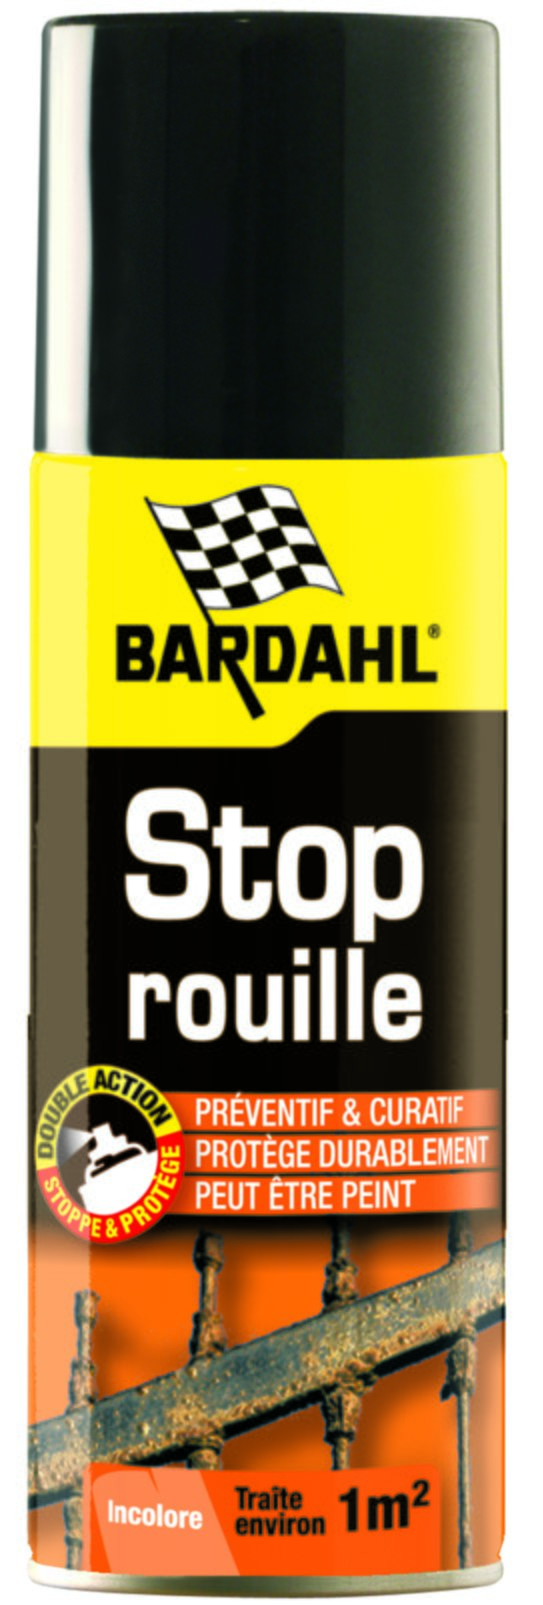 Stop rouille incolore 200ml - BARDAHL